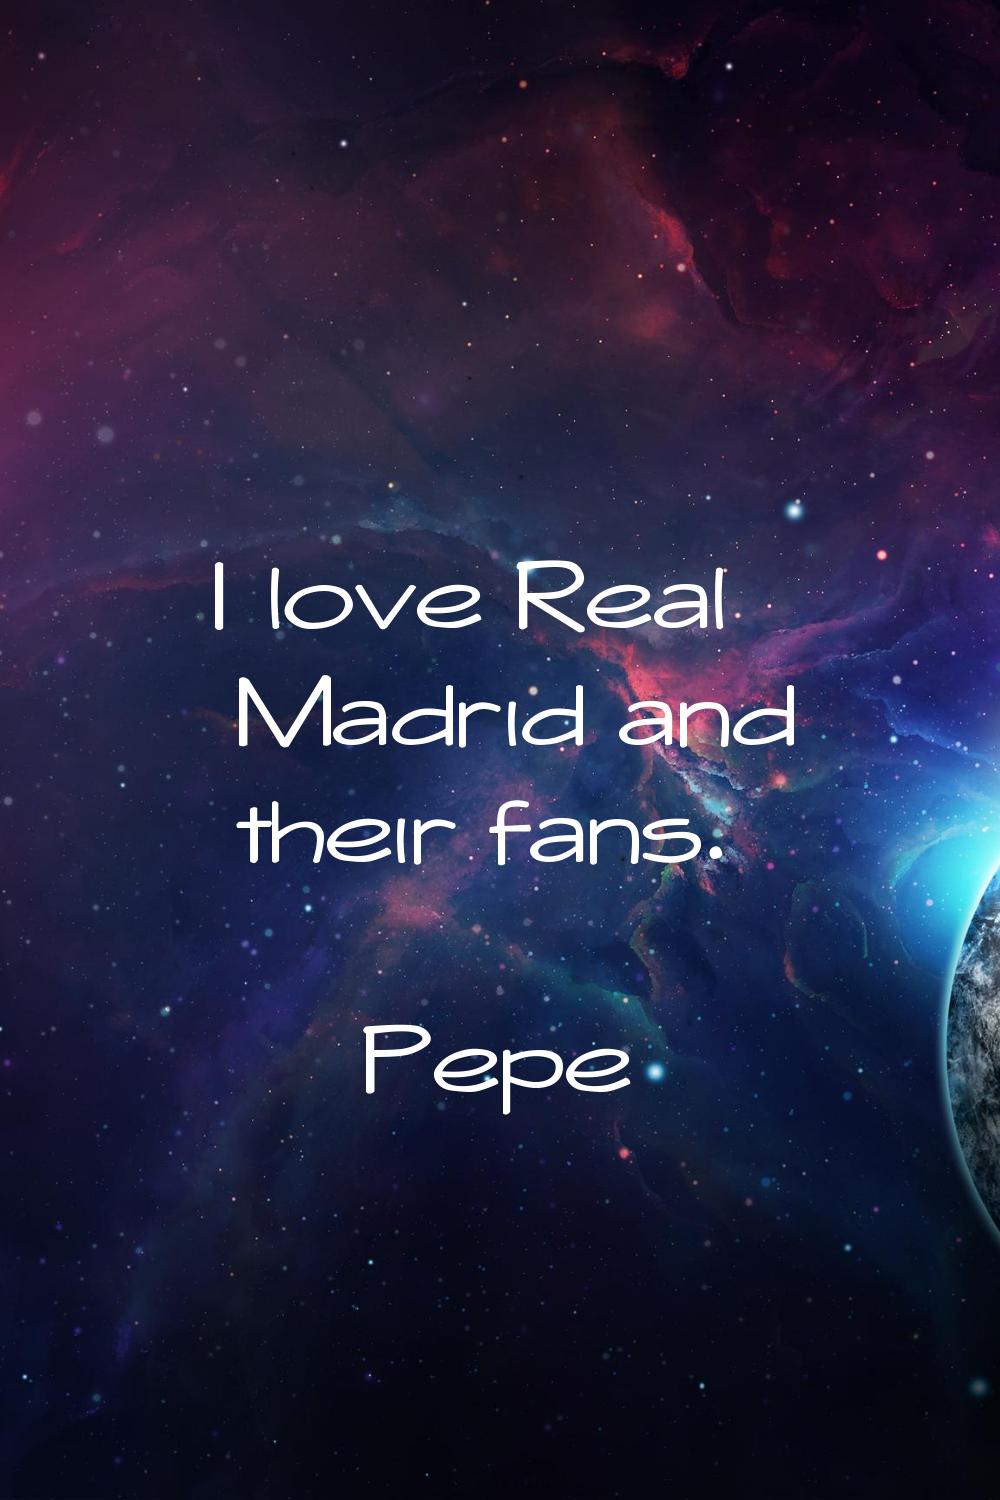 I love Real Madrid and their fans.